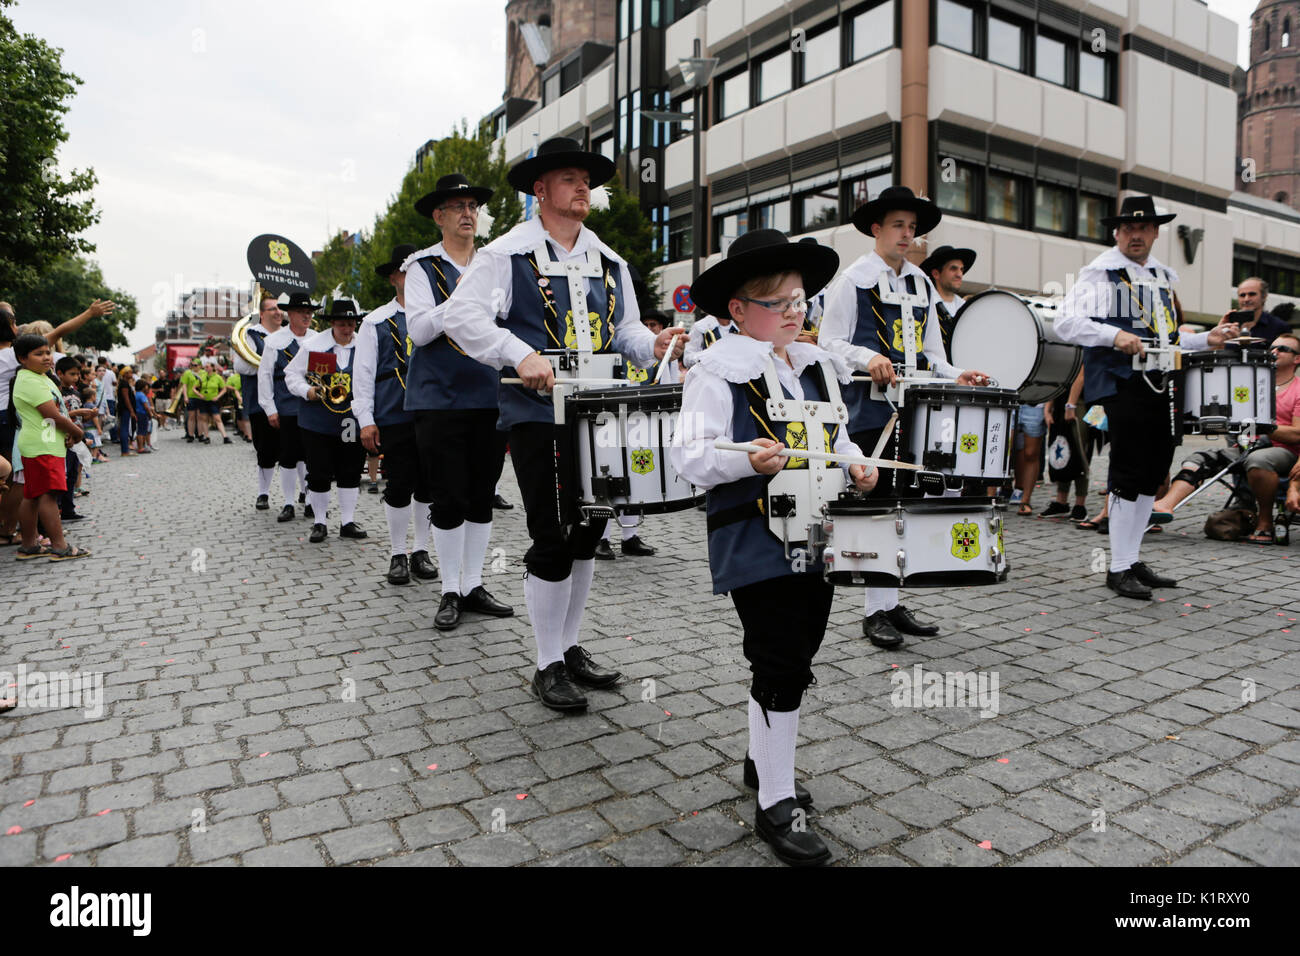 Worms, Germany. 27th August 2017. The marching band from the Mainzer Ritter Gilde marches in the parade. The first highlight of the 2017 Backfischfest was the big parade through the city of Worms with over 80 groups and floats. Community groups, music groups and business from Worms and further afield took part. Credit: Michael Debets/Alamy Live News Stock Photo